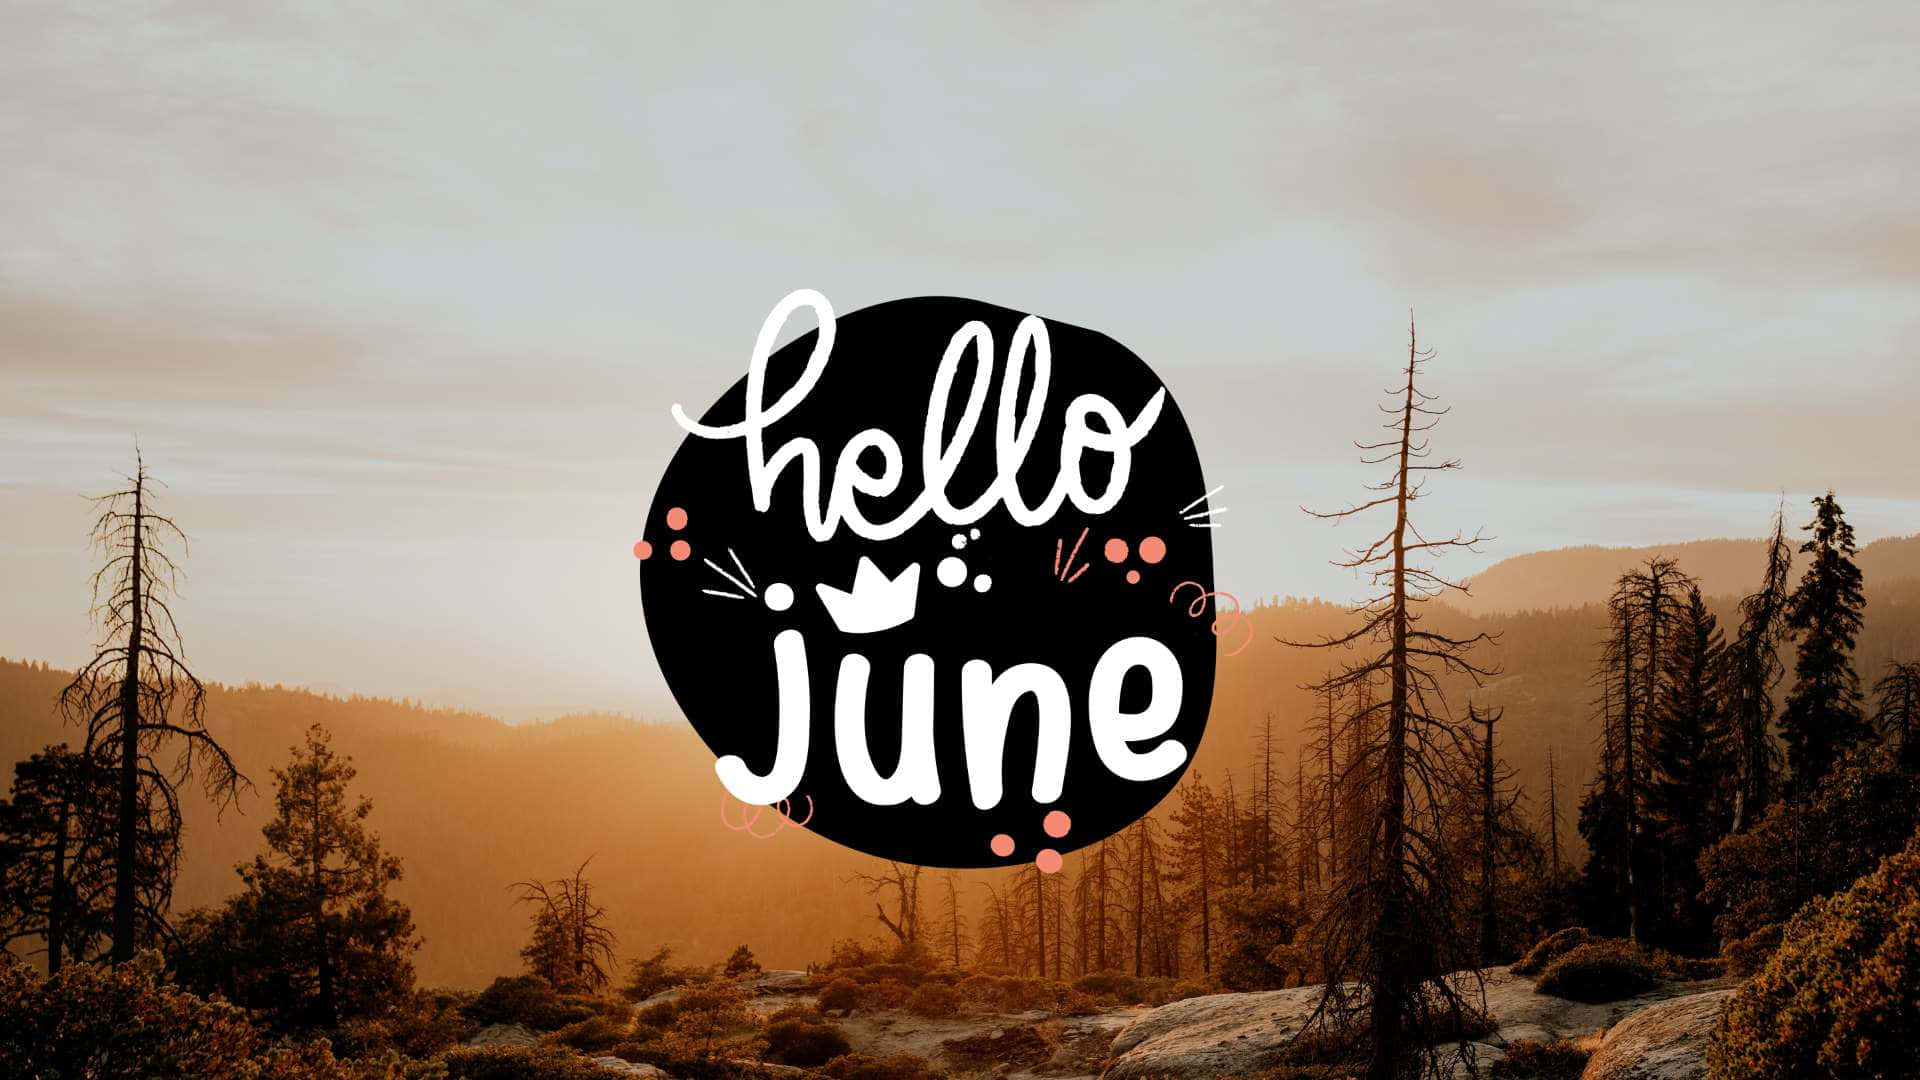 hello june logo with trees and mountains Wallpaper